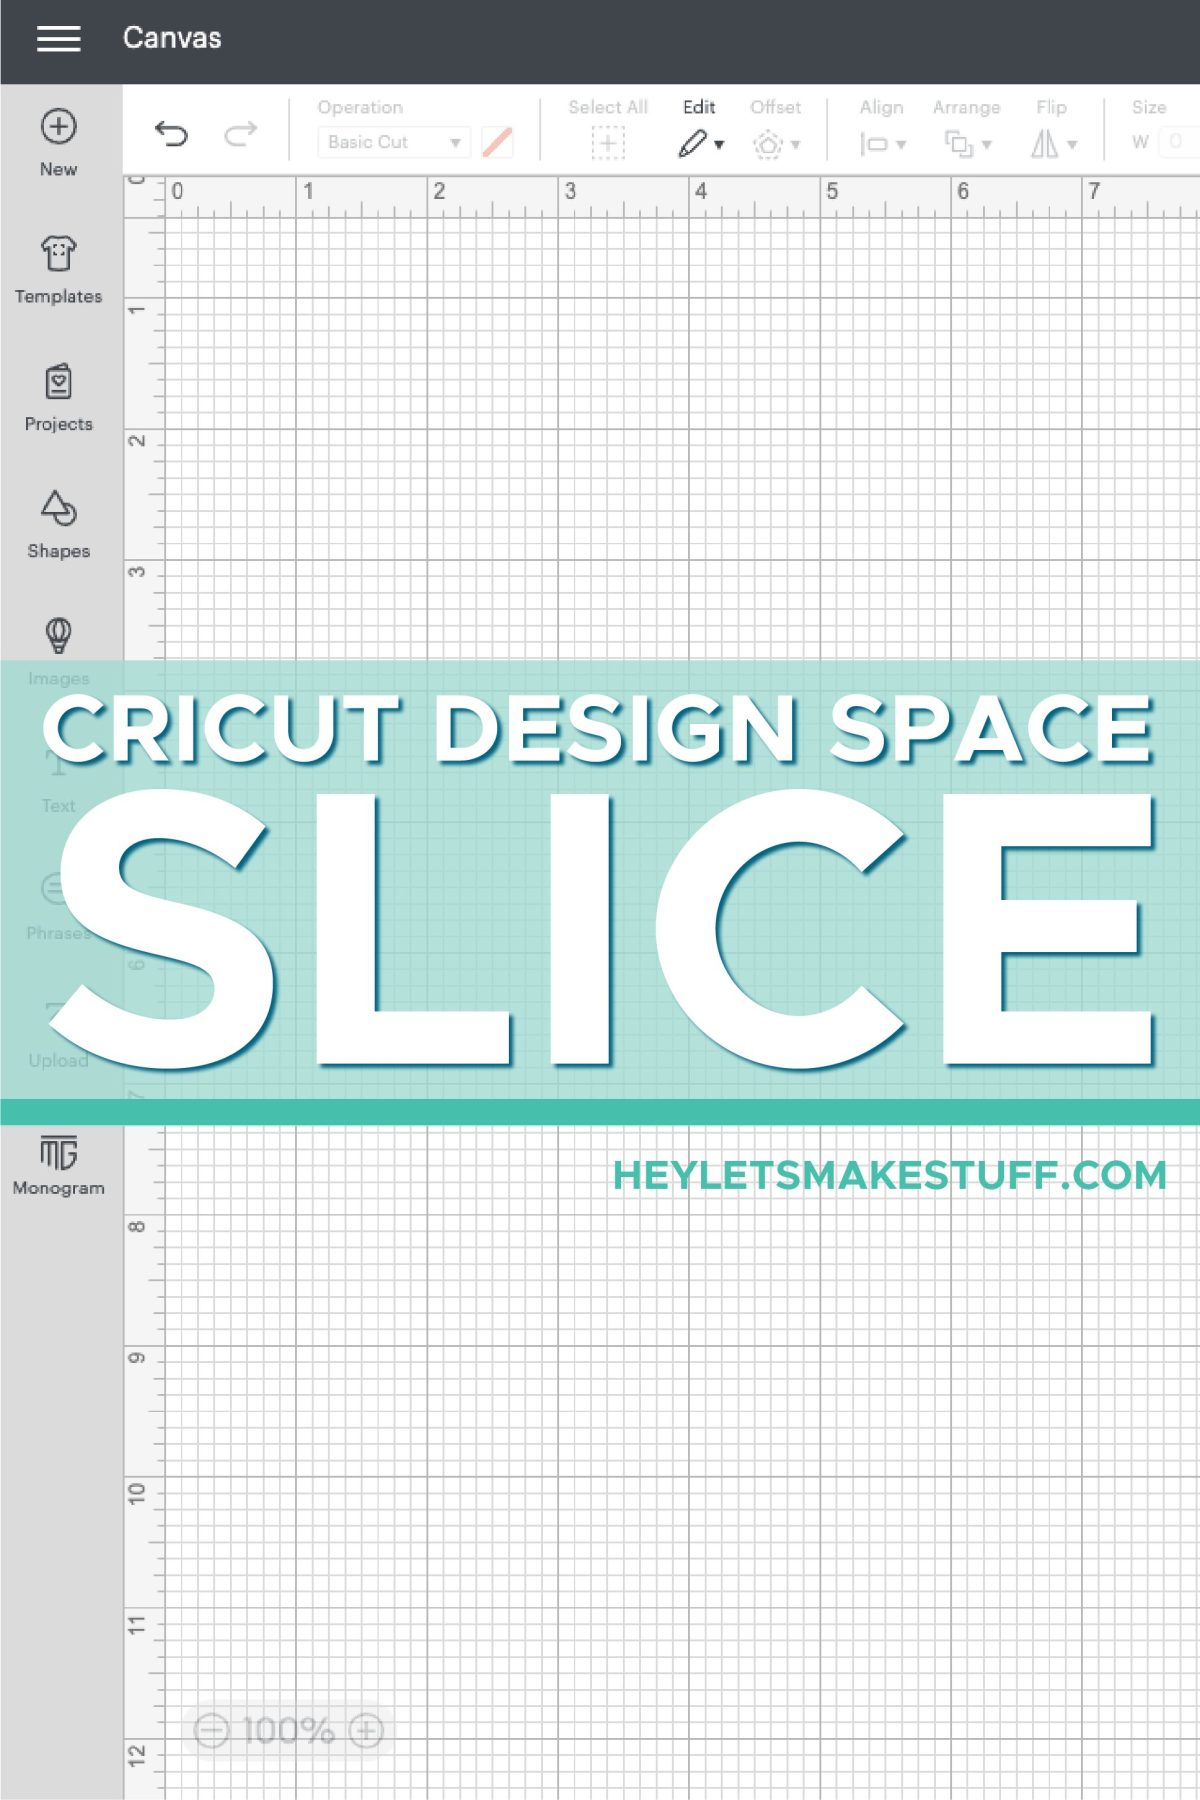 DS Canvas with "Slice in Cricut Design Space" in white text on light blue box.